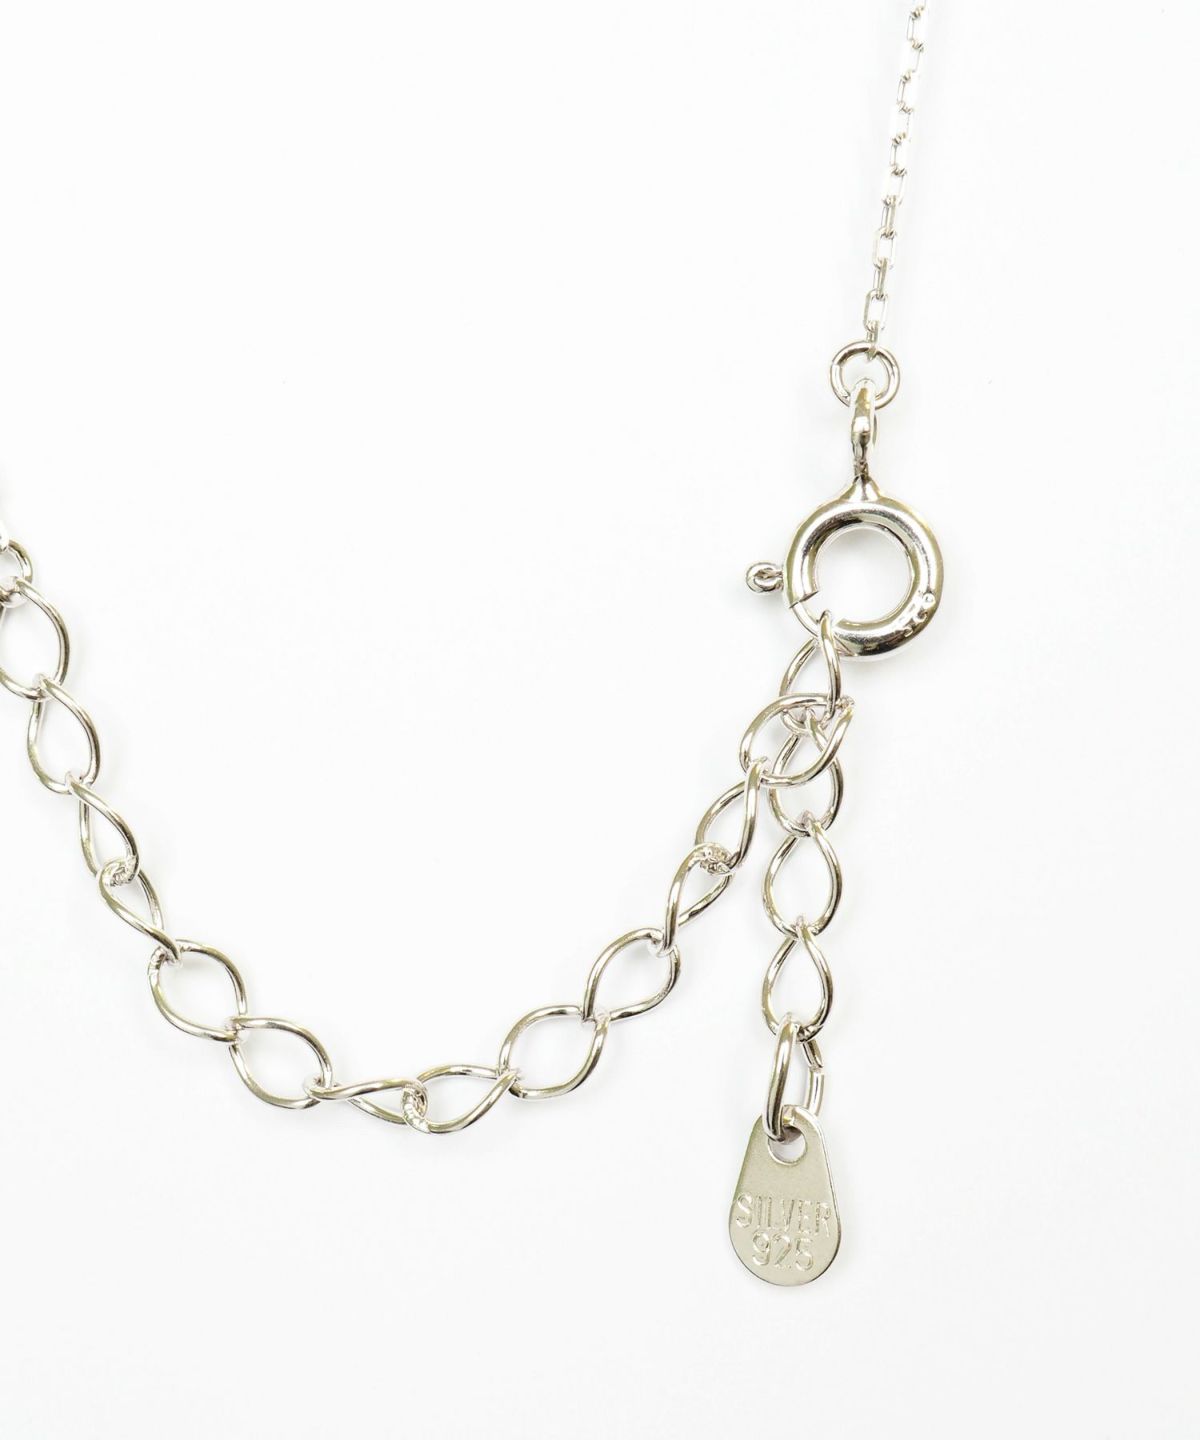 Drop frame 925 Silver Dancing Stone Pendant【H&Ccollection】